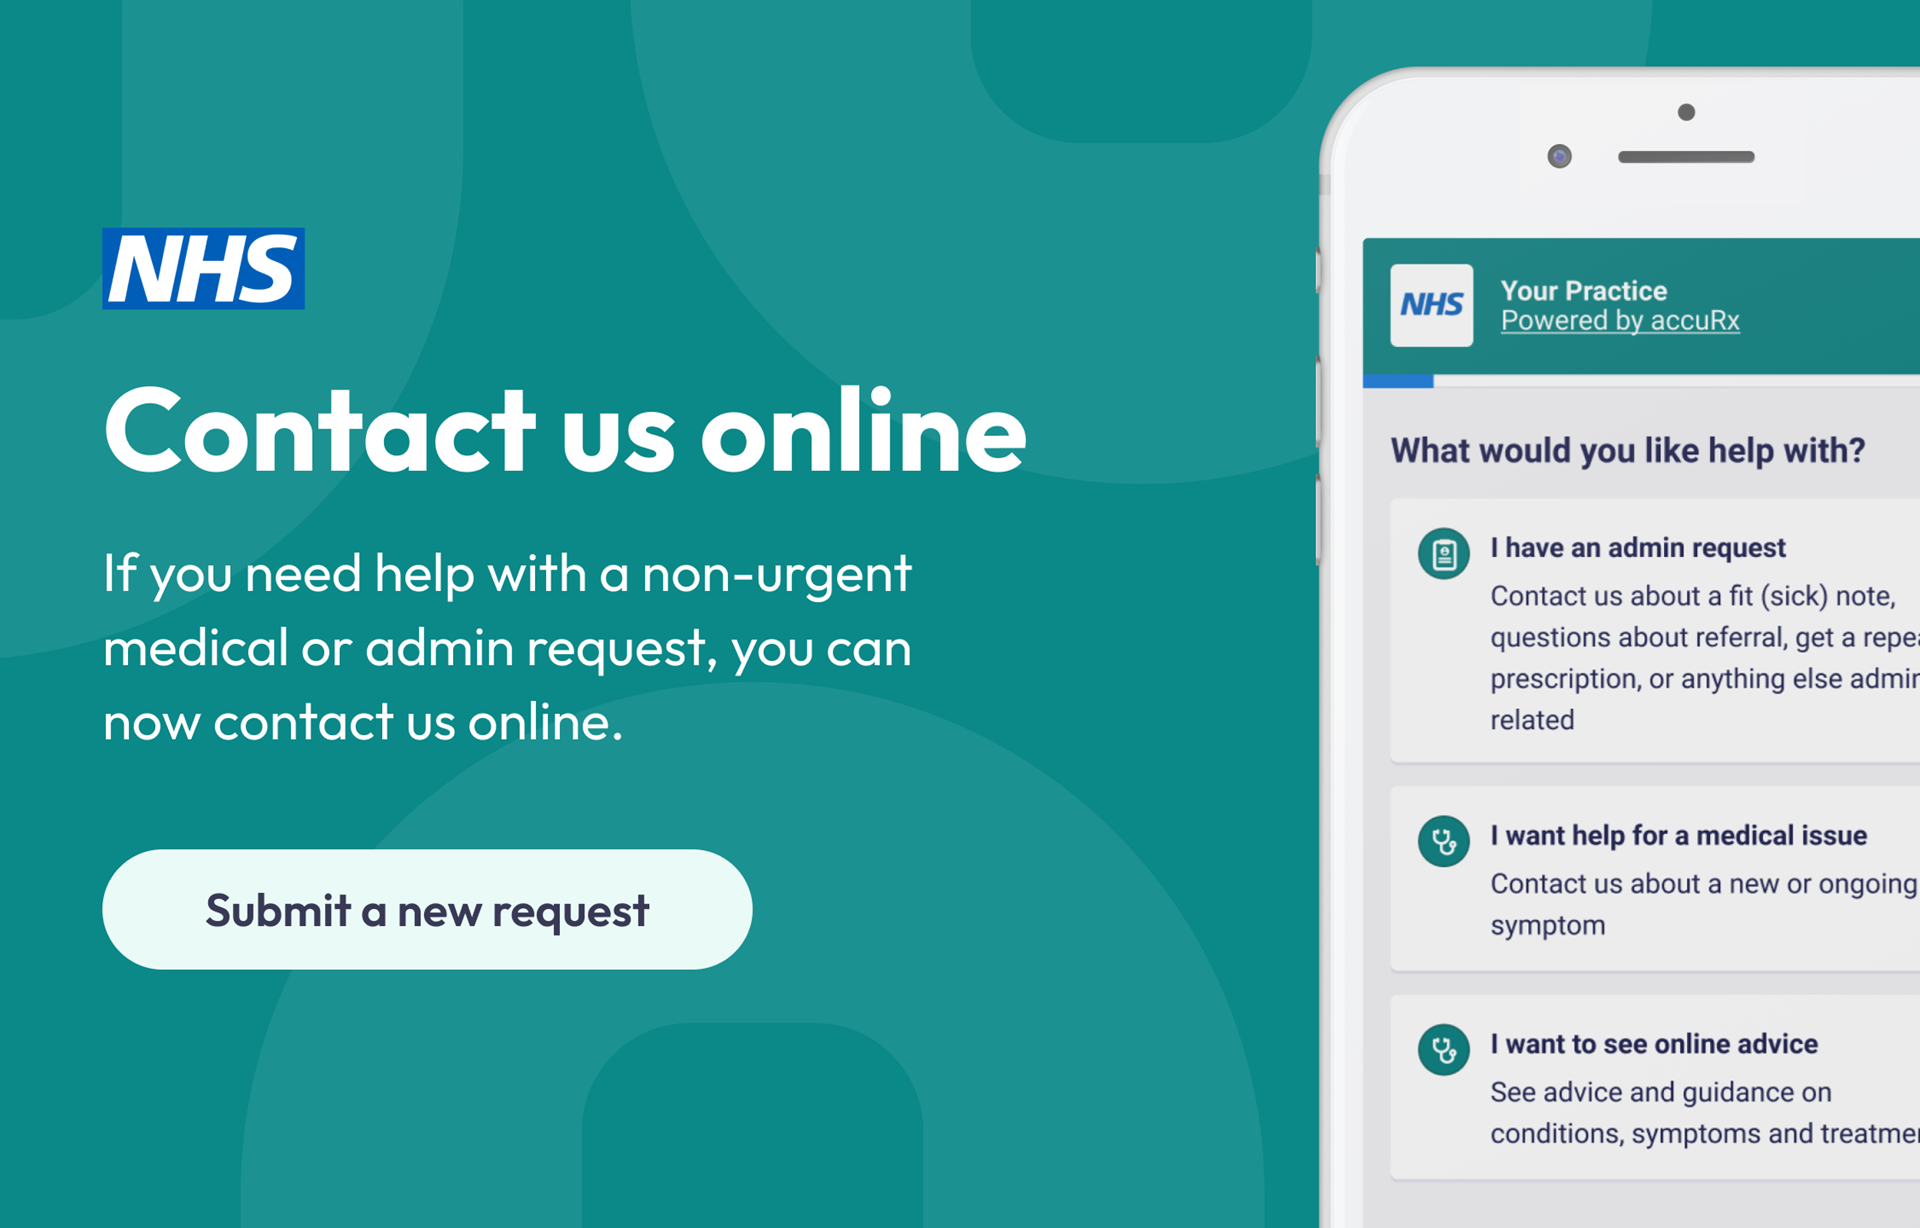 NHS Contact us online. If you need help with a non-urgent medical or admin request, you can now contact us online. Submit a request